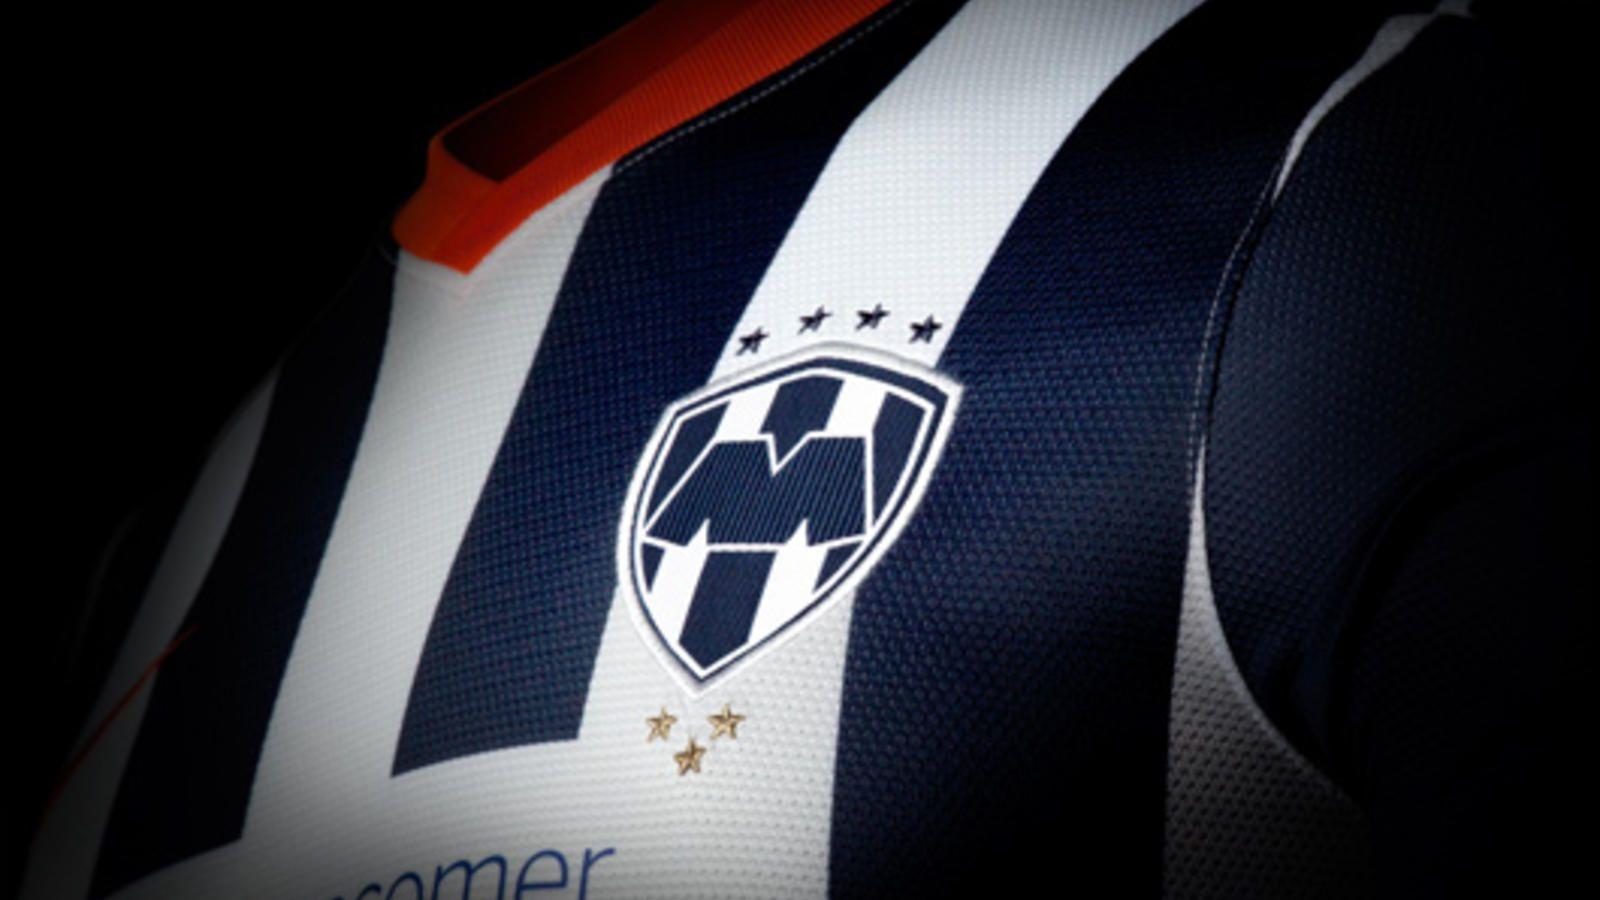 Nike Unveils C.F. Monterrey Home And Away Kits For The 2013 14